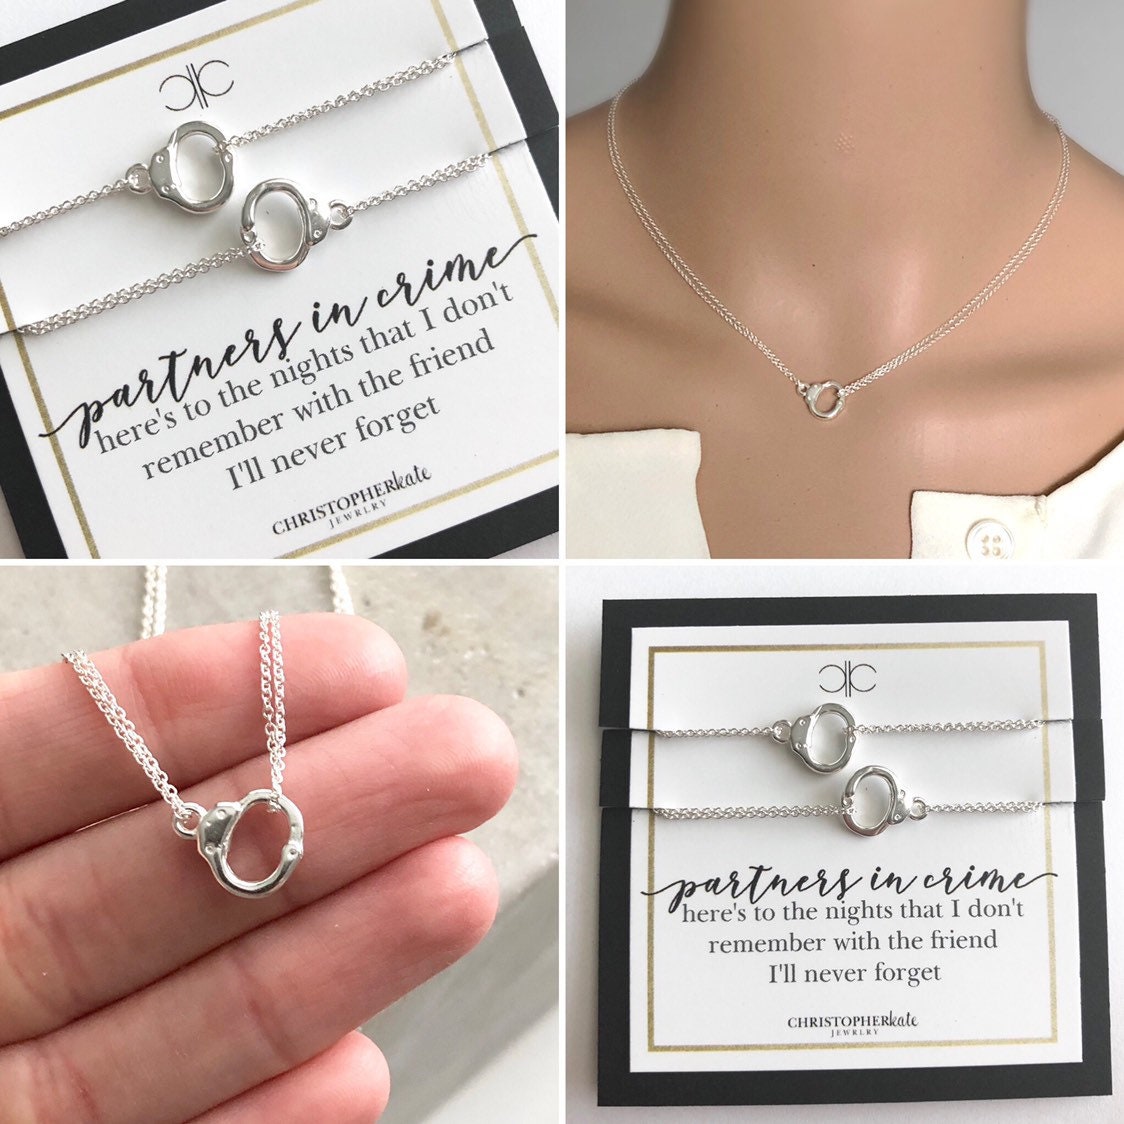 Magnetic Love Necklaces - Skull - to My Partner-In-Crime - I Just Want A Weirdo to Go on Adventures with - Gnni26002 Standard Box